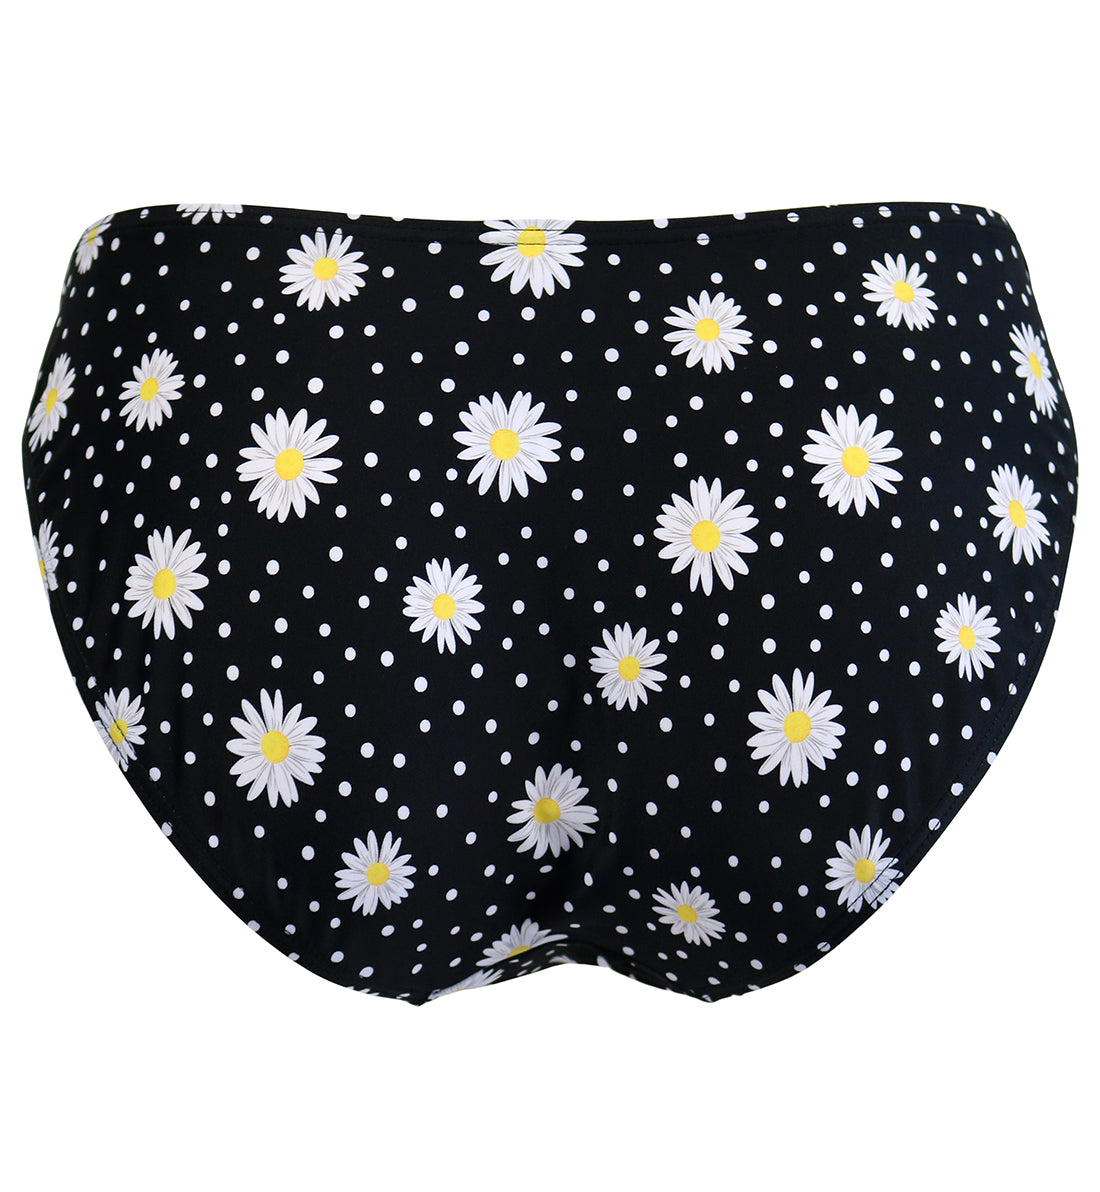 Pour Moi Out Of Office V Front High Leg Swim Brief (24503),XS,Daisy Spot - Daisy Spot,XS